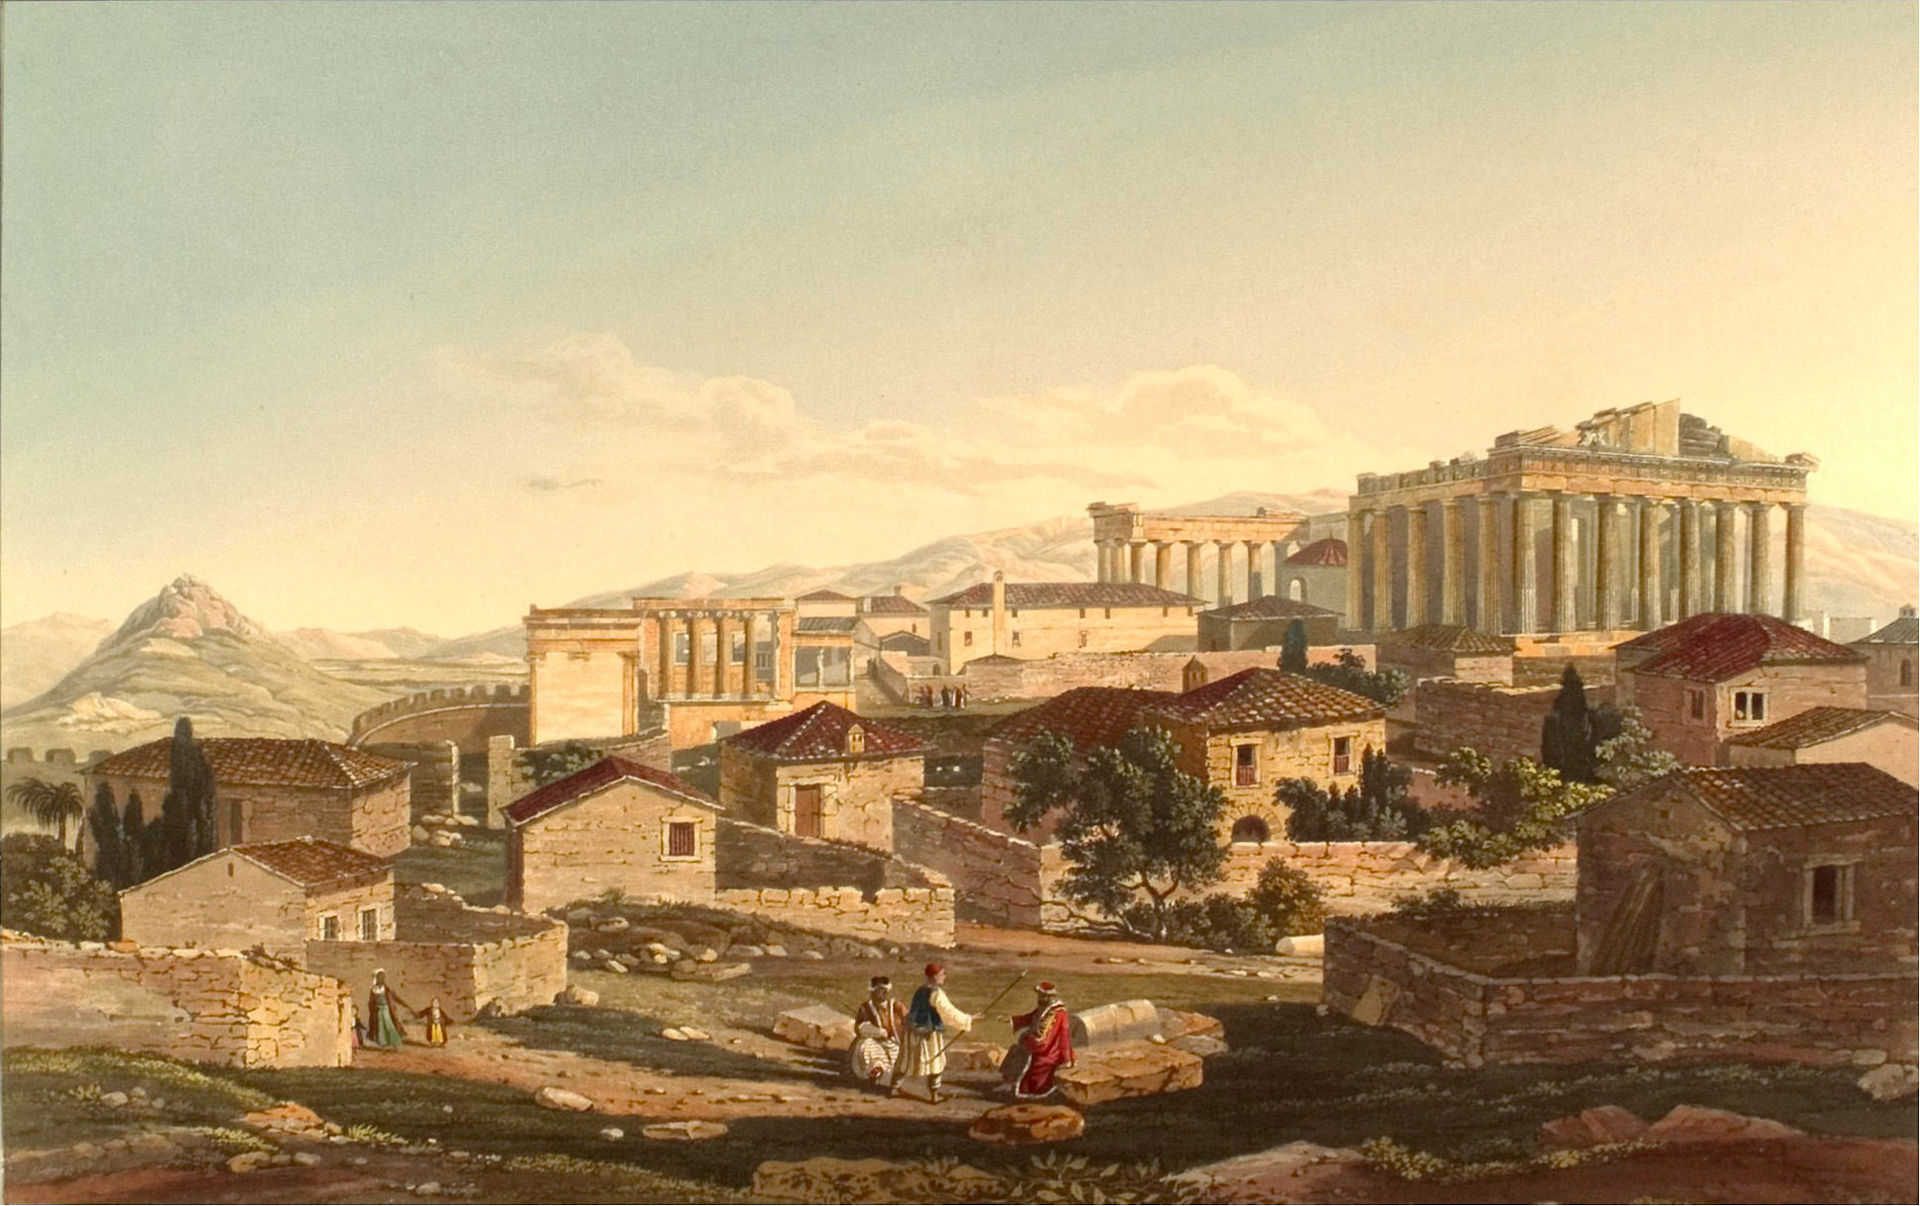 West Front of the Parthenon